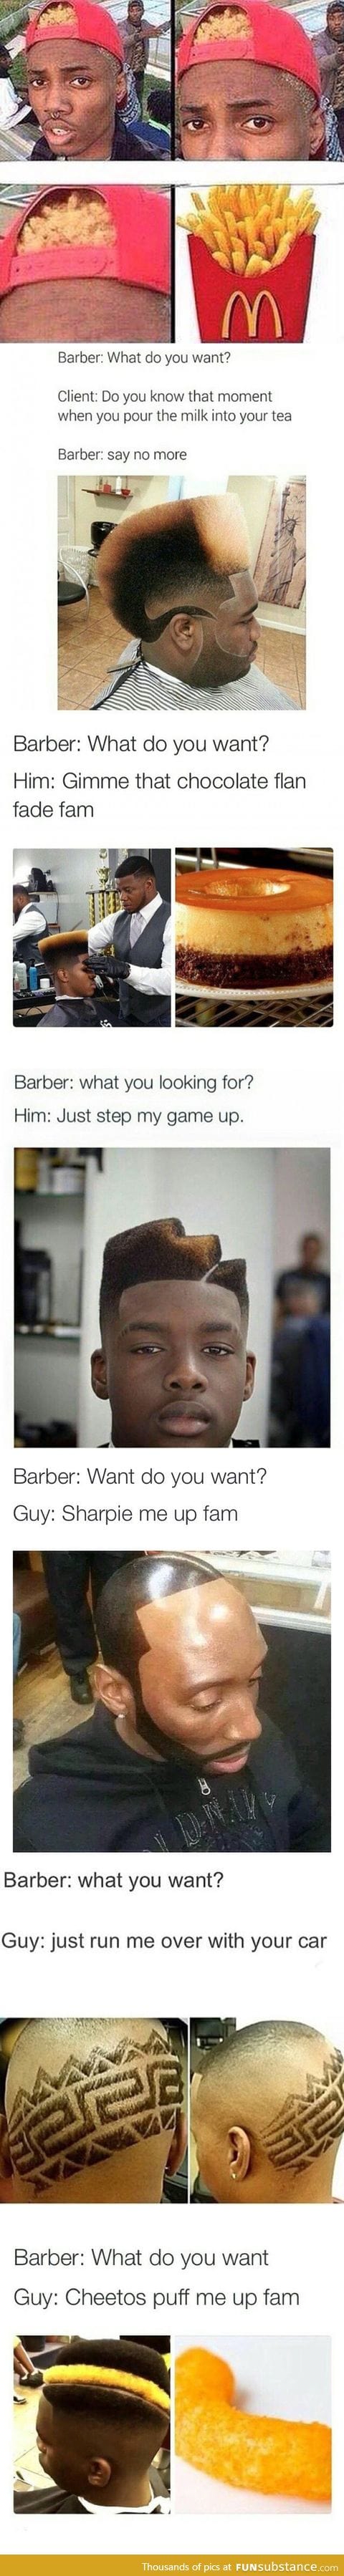 Barber: What do you want? Comp